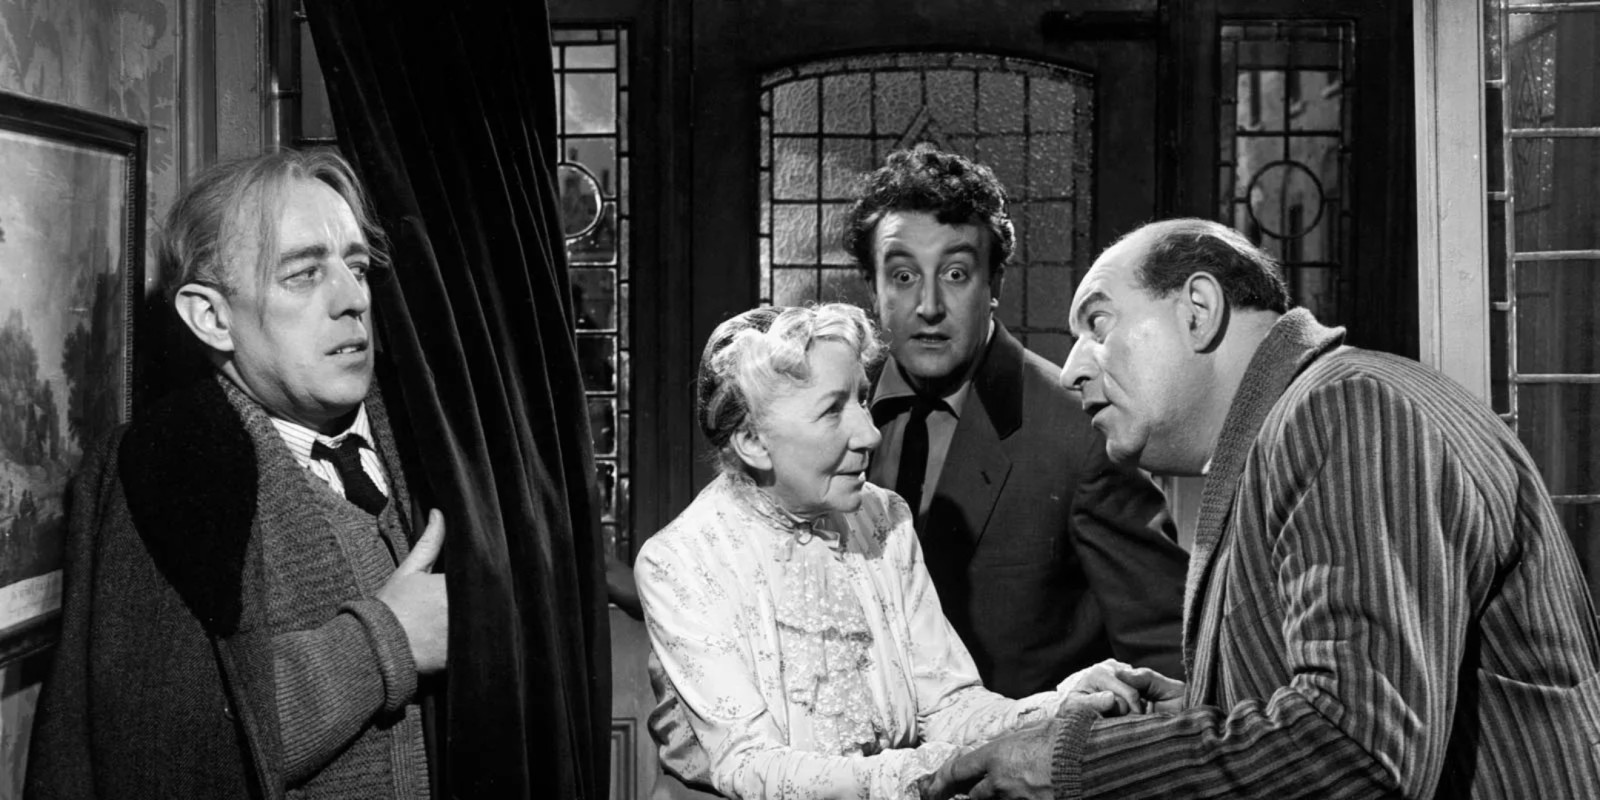 THE LADYKILLERS (1955)